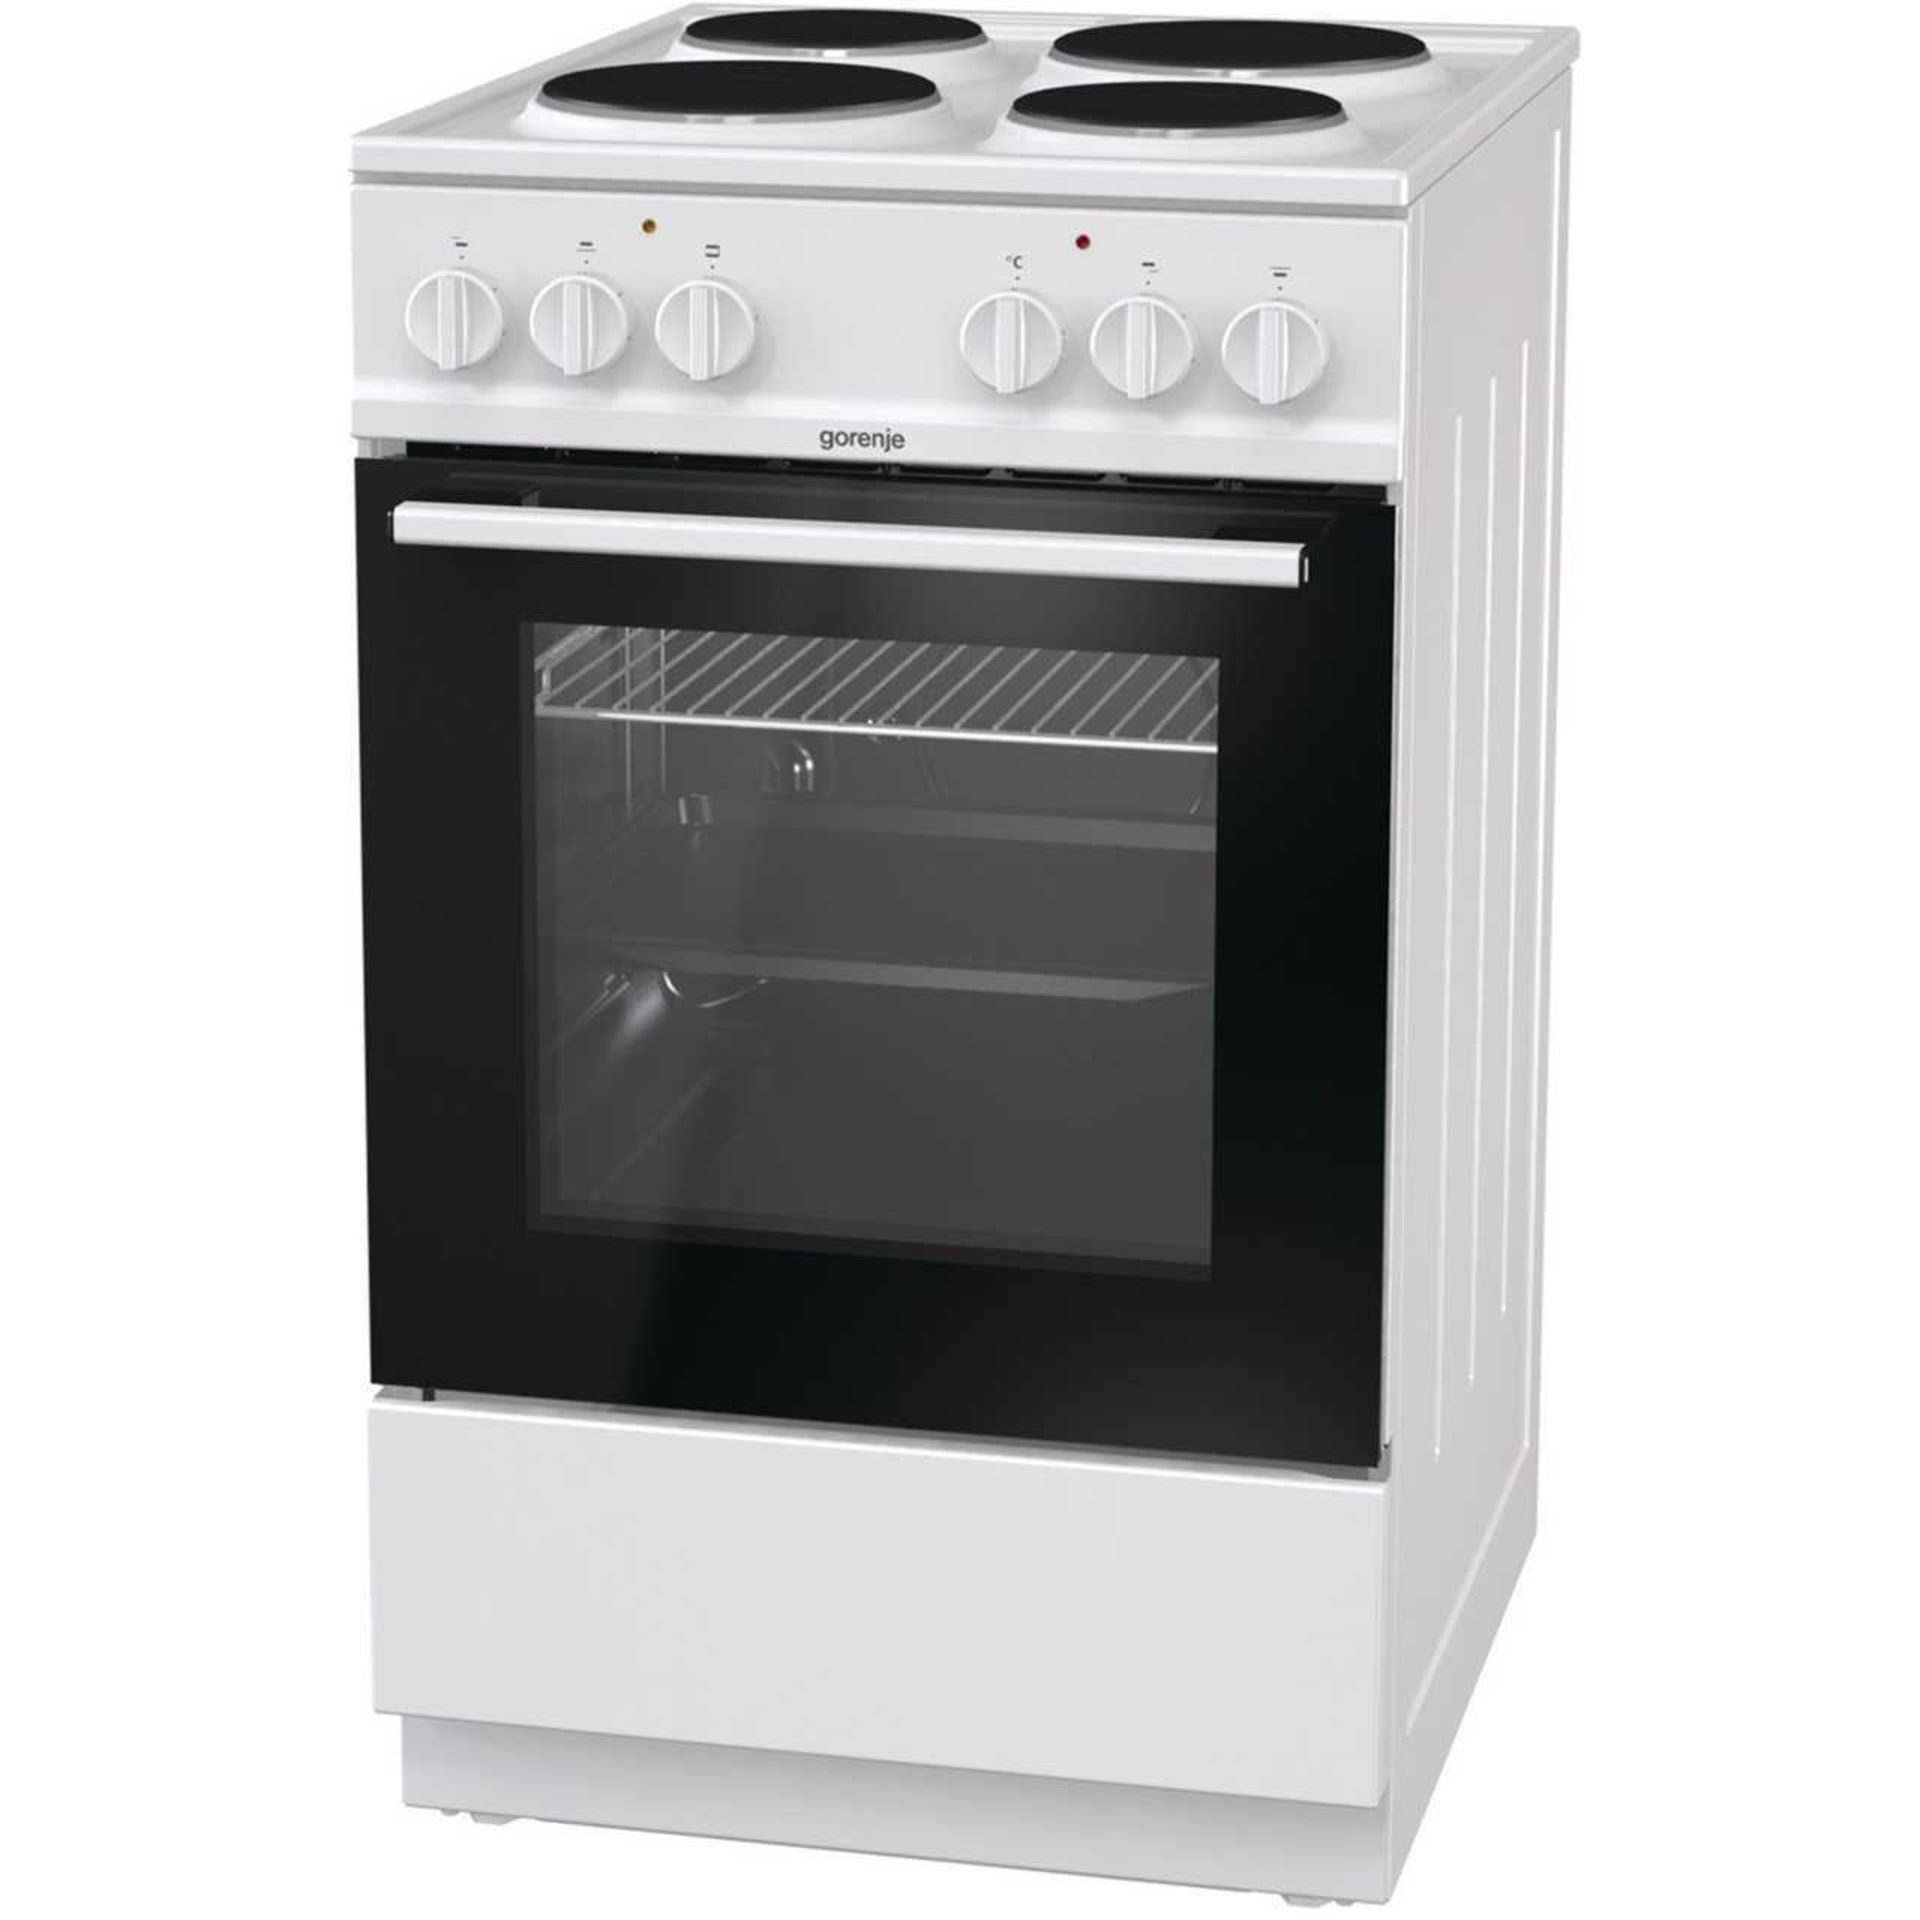 (Kw) RRP £300, Lot To Contain X1 Gorenje E5111Wg Electric Cooker, Unboxed - Image 2 of 4